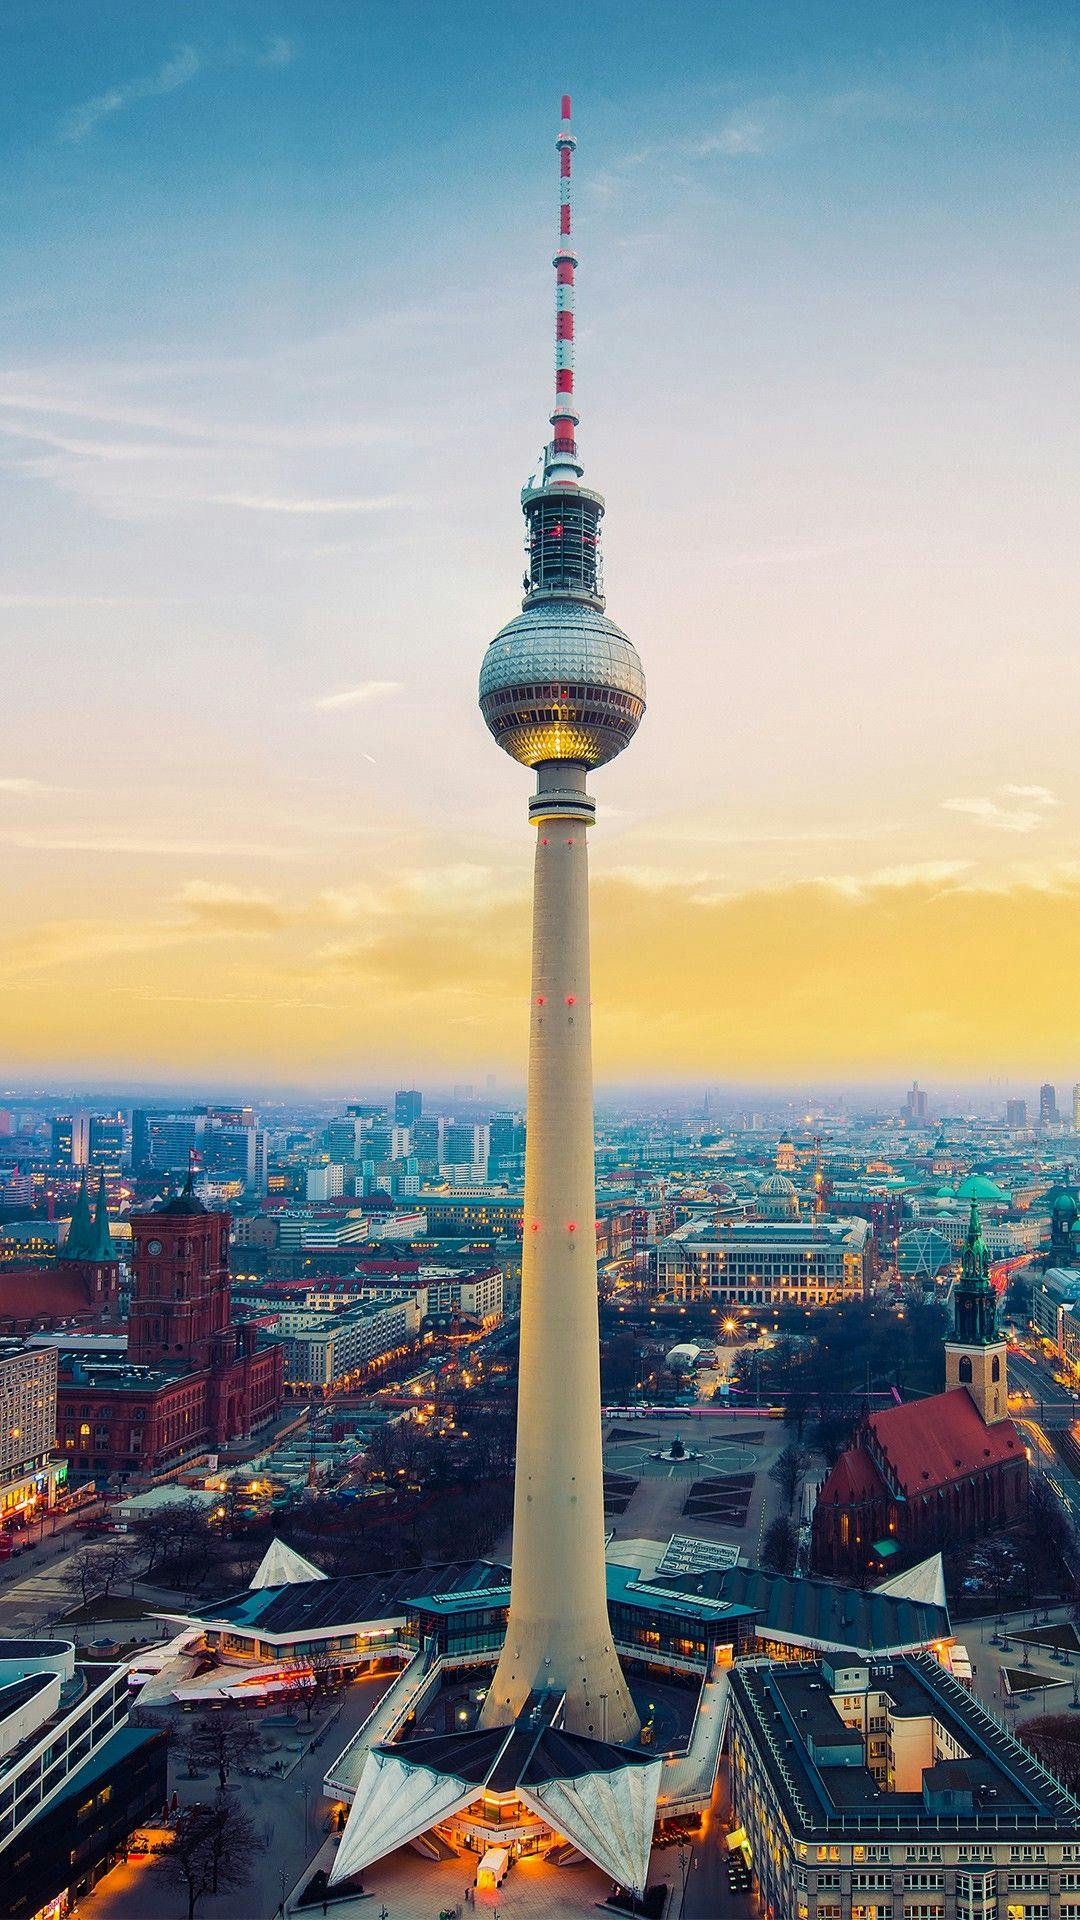 Berlin - The place to be